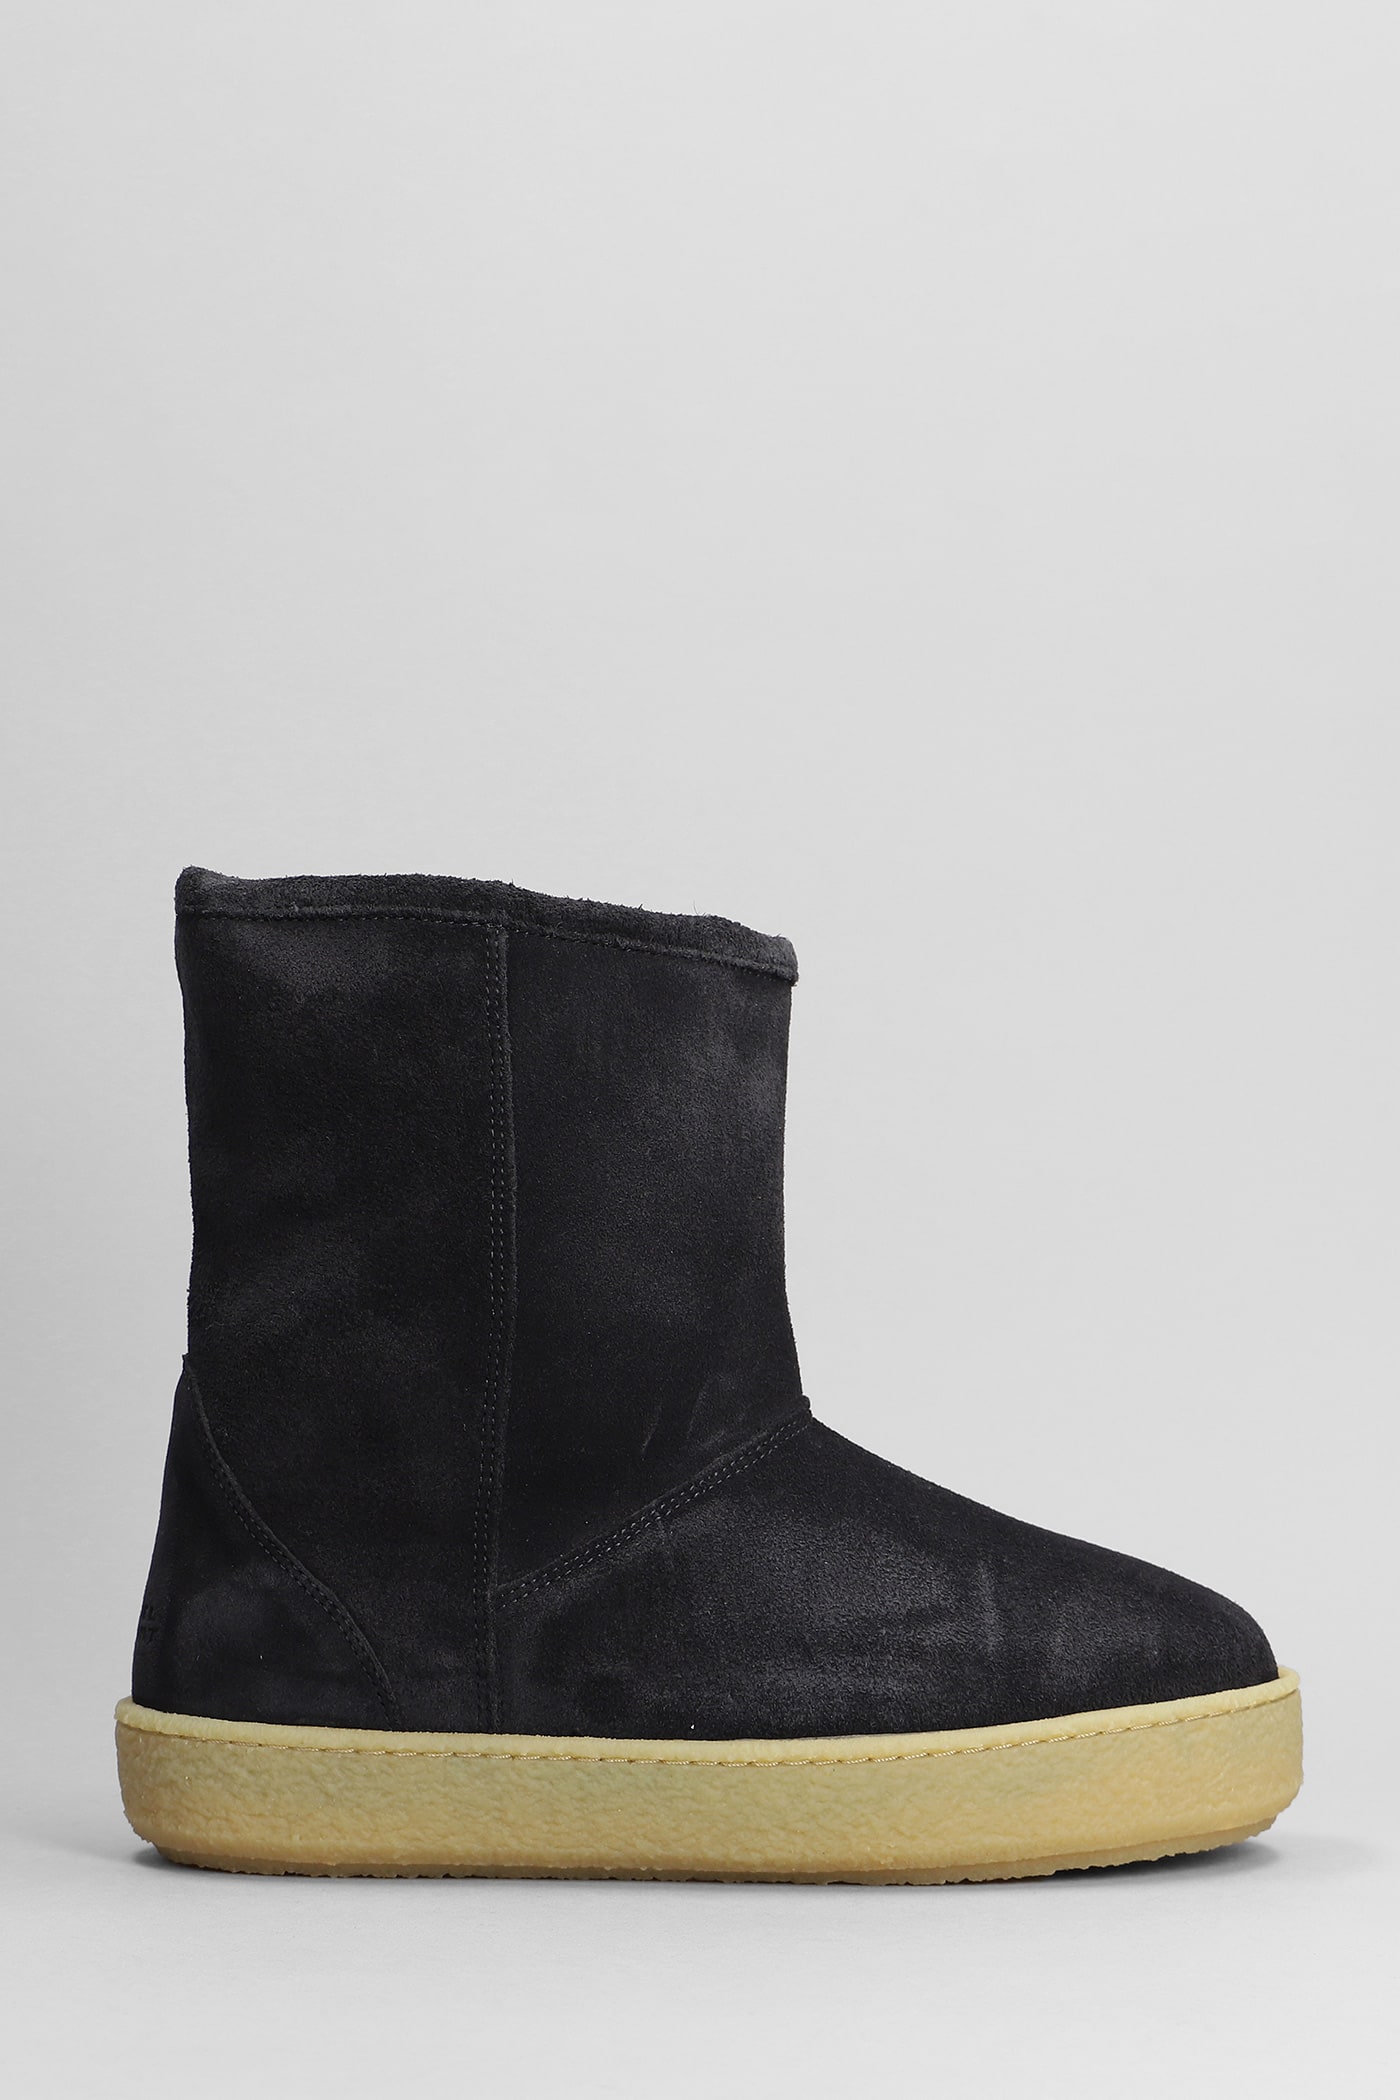 ISABEL MARANT FRIEZE ANKLE BOOTS IN BLACK SUEDE